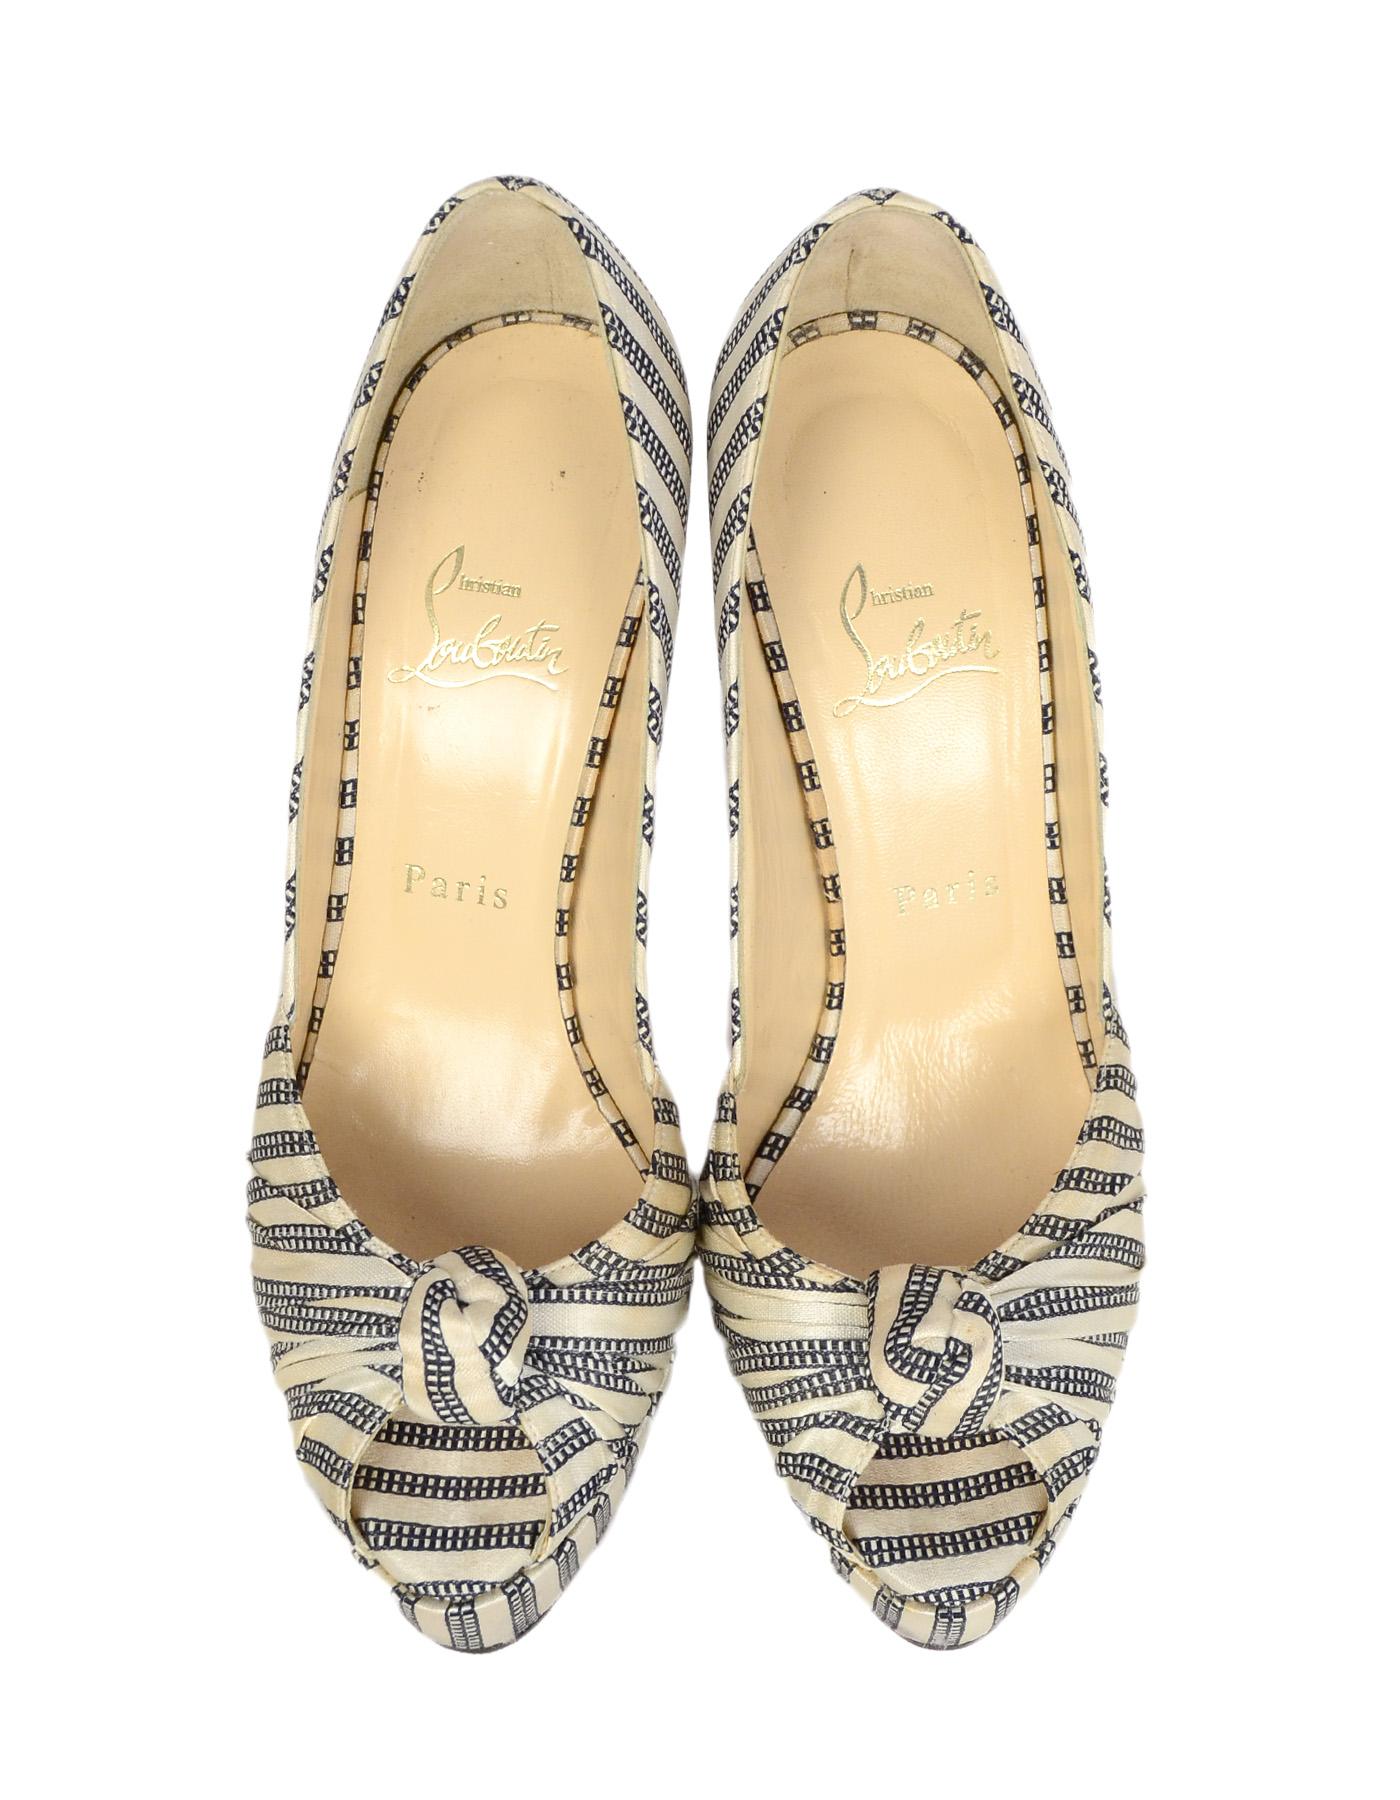 Christian Louboutin Navy/White Satin Stripe Greissimo 140 Peep Toe Knot Pumps sz 39.5

Made In: Italy
Color: Navy blue and ivory satin
Hardware: None
Materials: Satin & leather
Closure/Opening: Slide on 
Overall Condition: Very good.  Slight